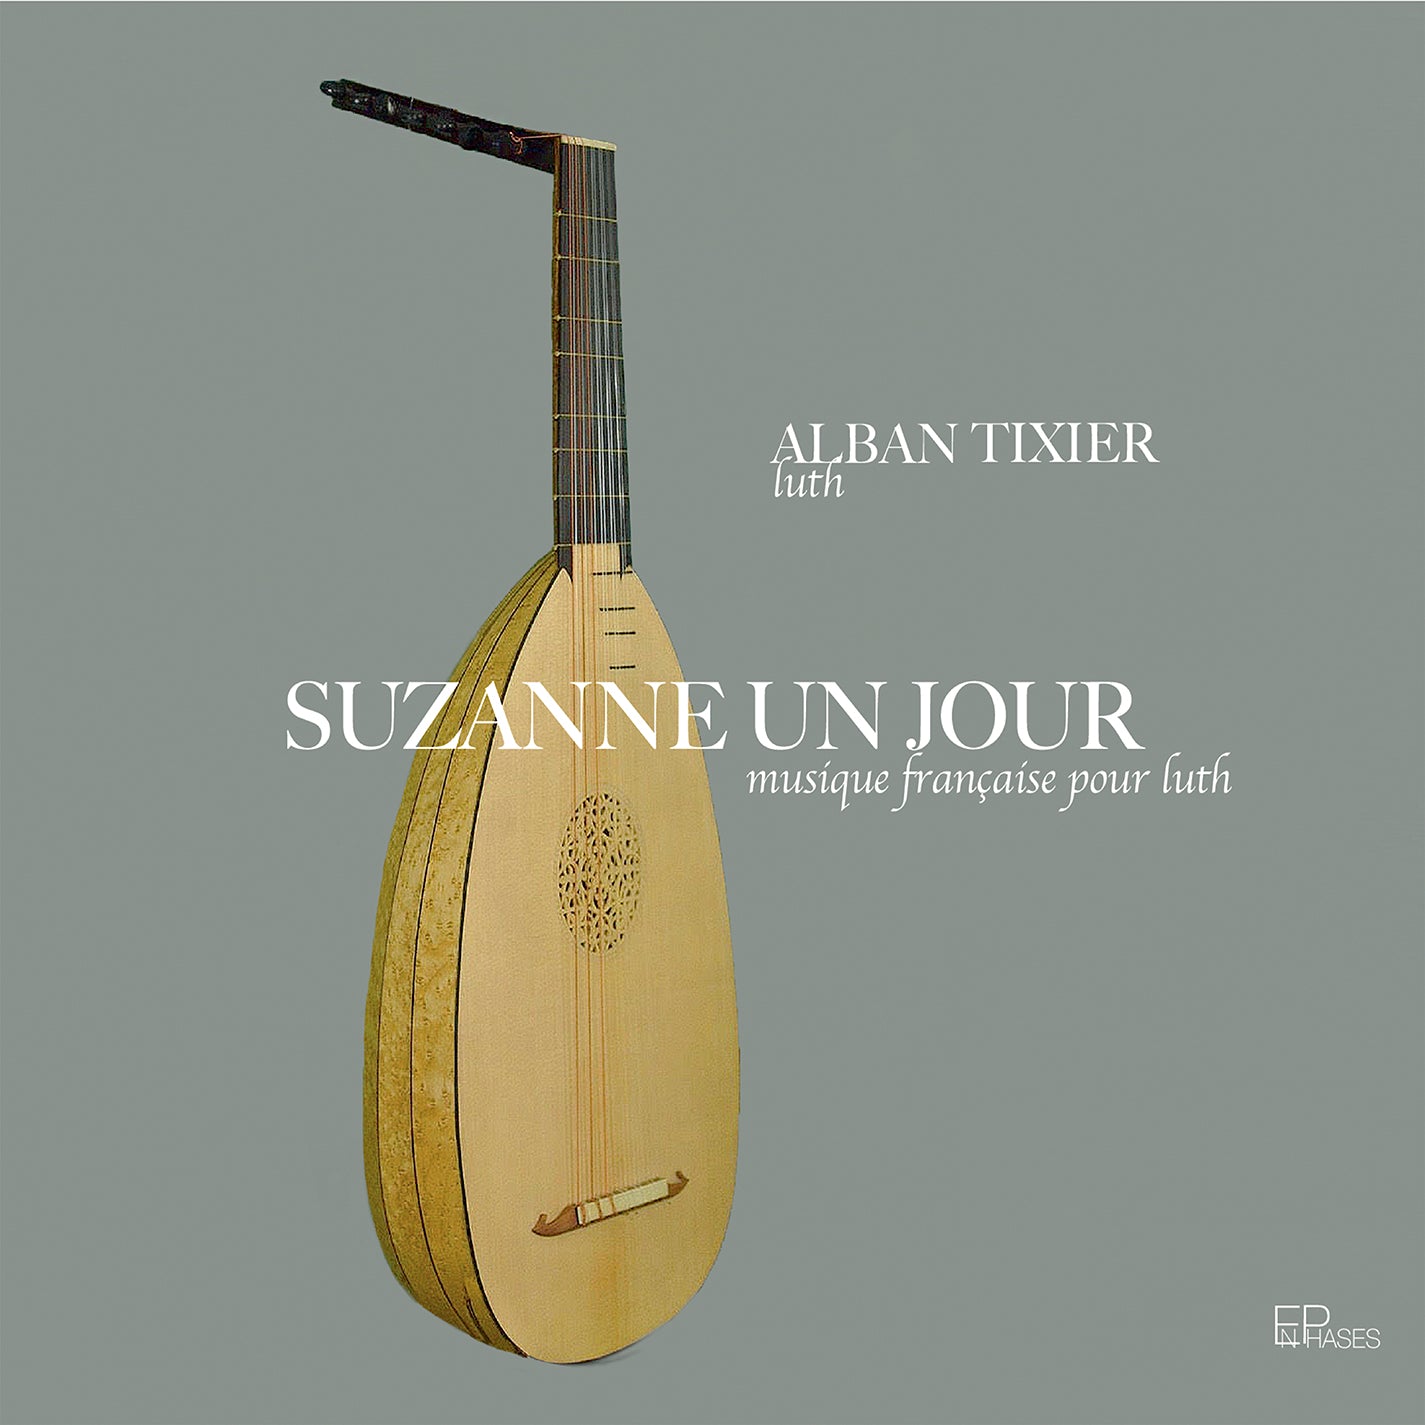 Suzanne un Jour - French Lute Music / Tixier